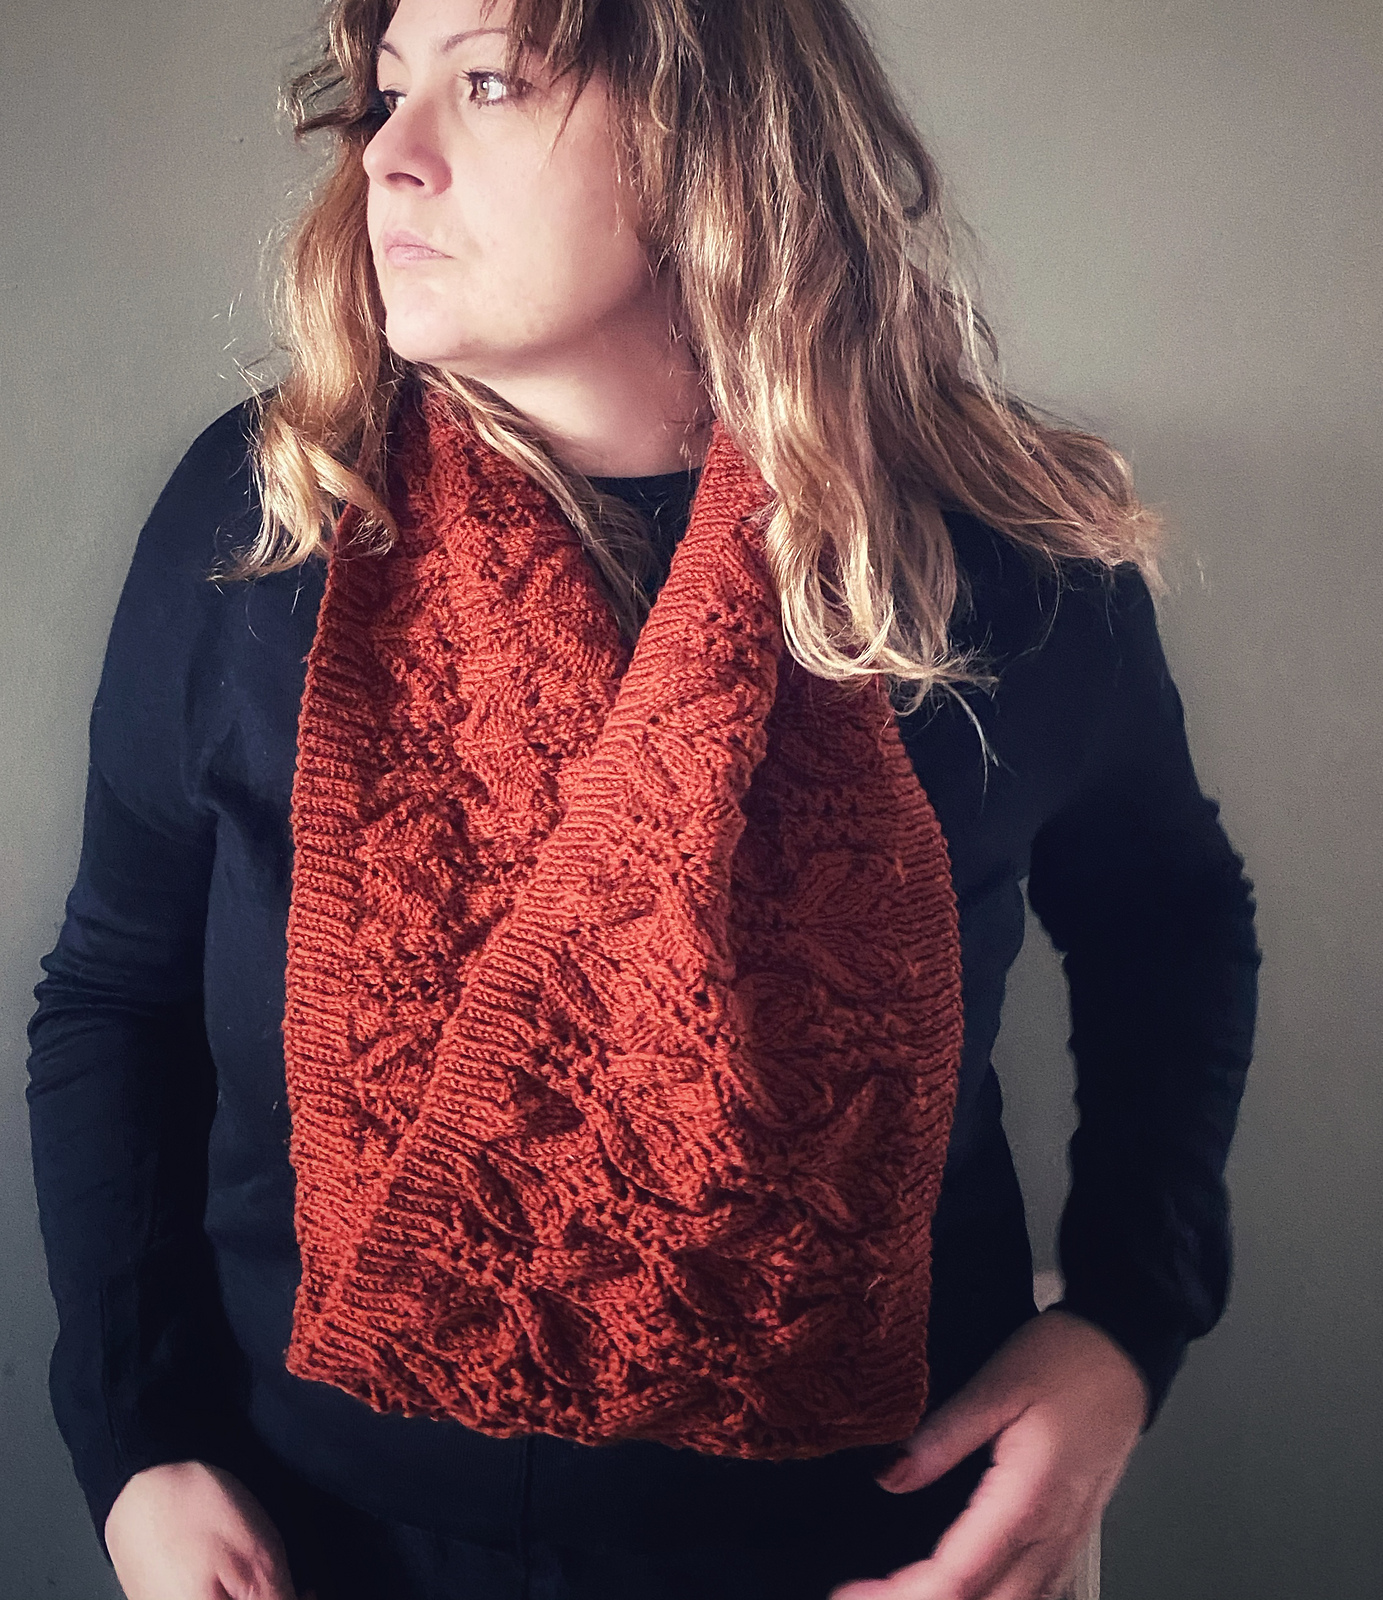 Diffraction Cowl by Kelly Menzies